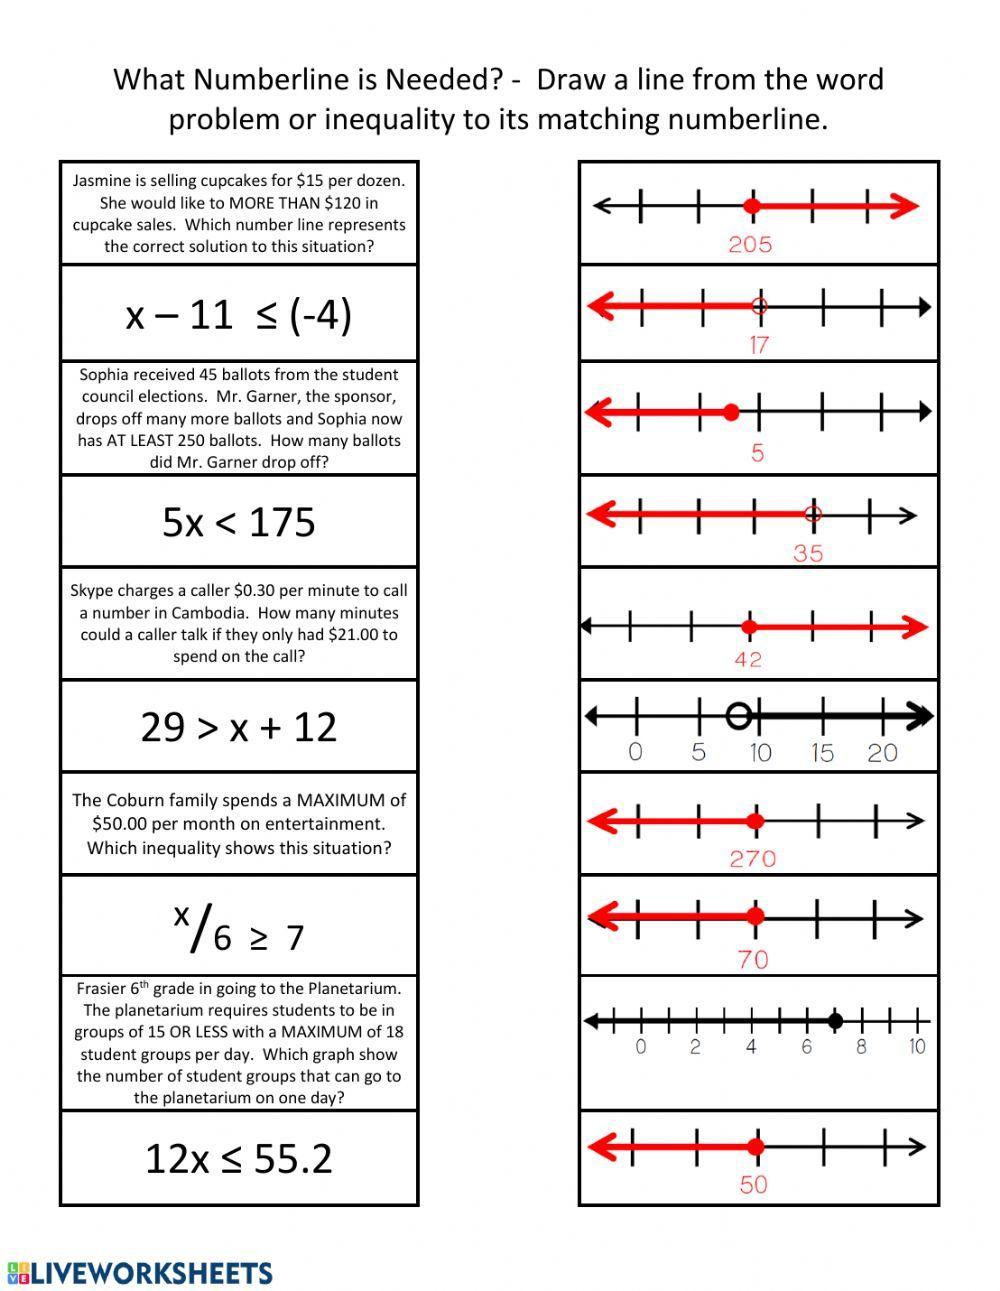 Inequality to Numberline Matching